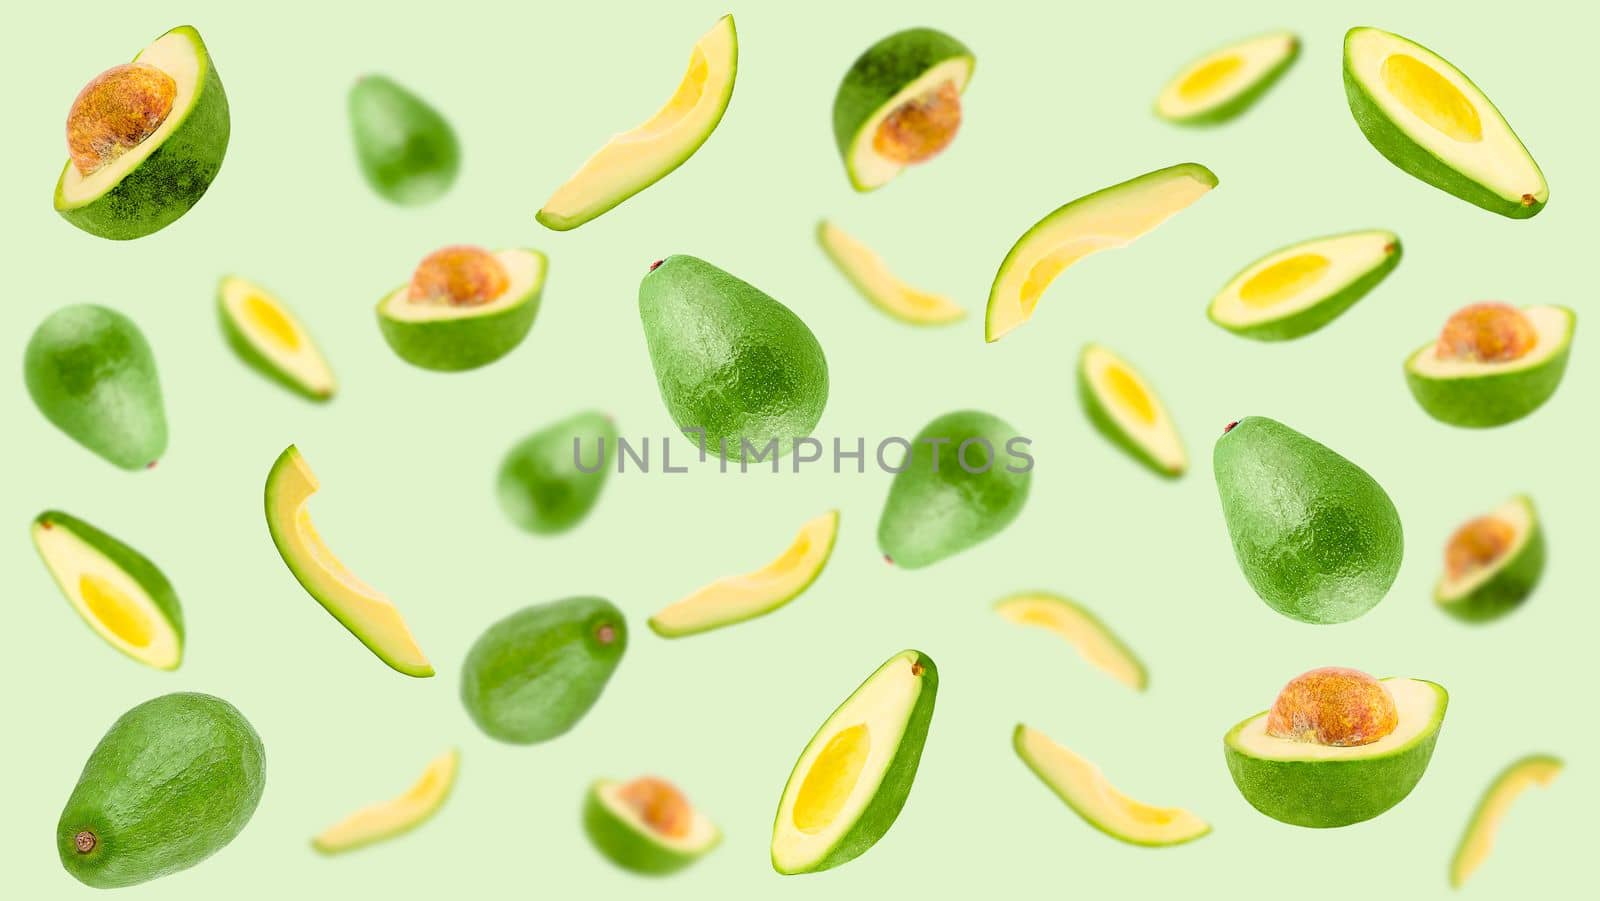 Creative levitation pattern with avocado. Selective focus. Isolated vegetables. Packaging concept. Clip art image for package design.